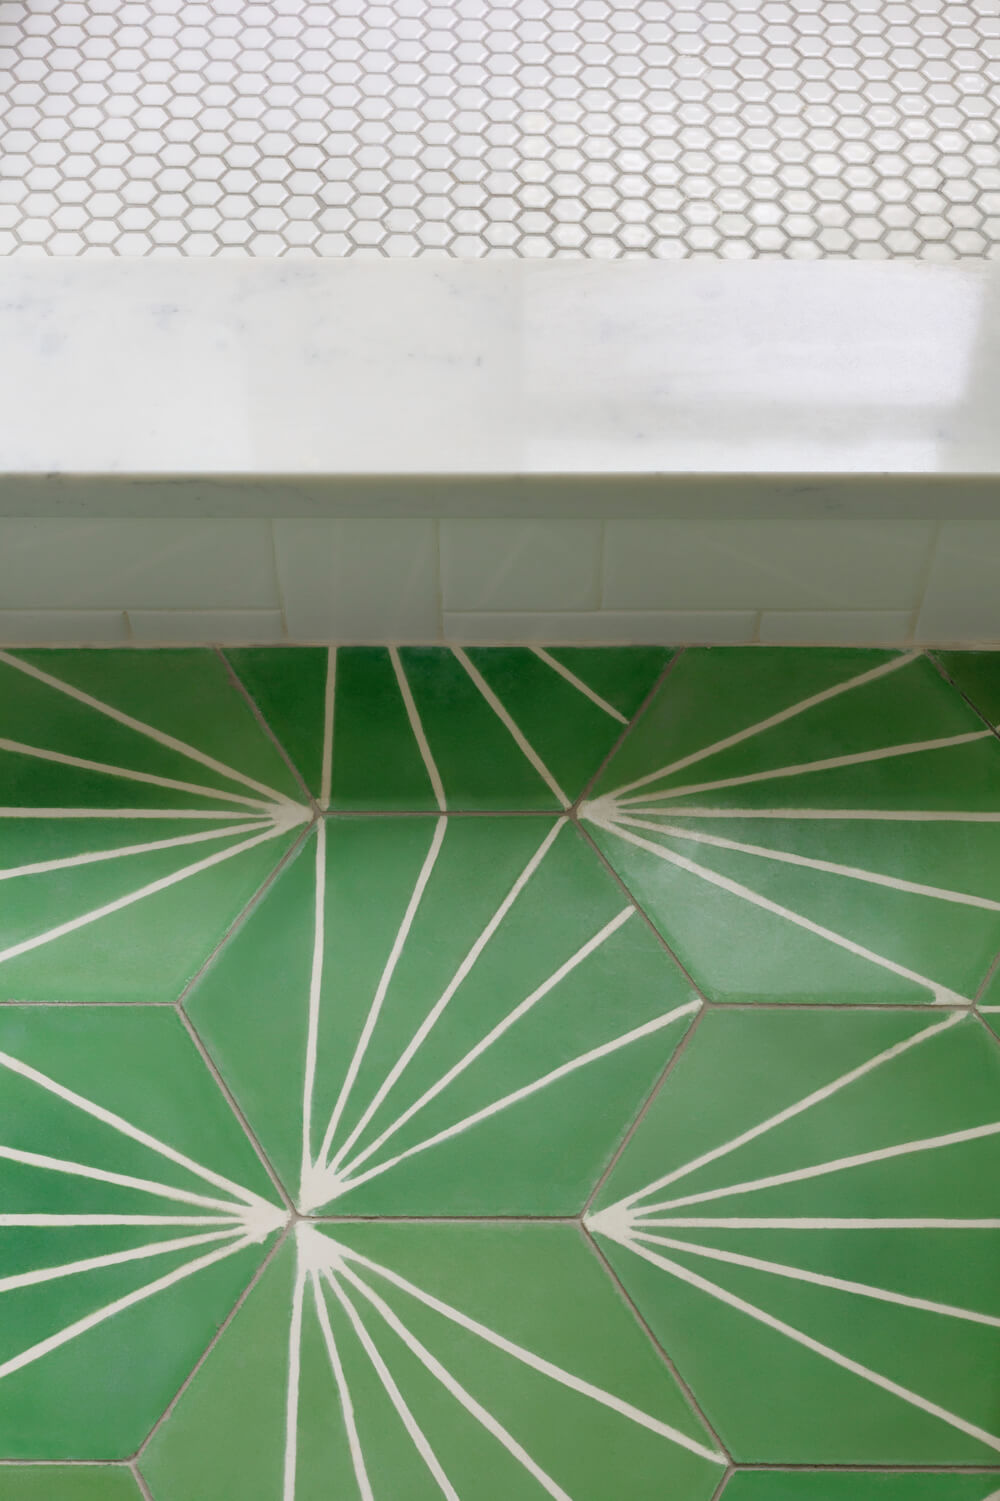 Hex tiles with sunburst patterns and small white hex tiles for walk in shower after renovation